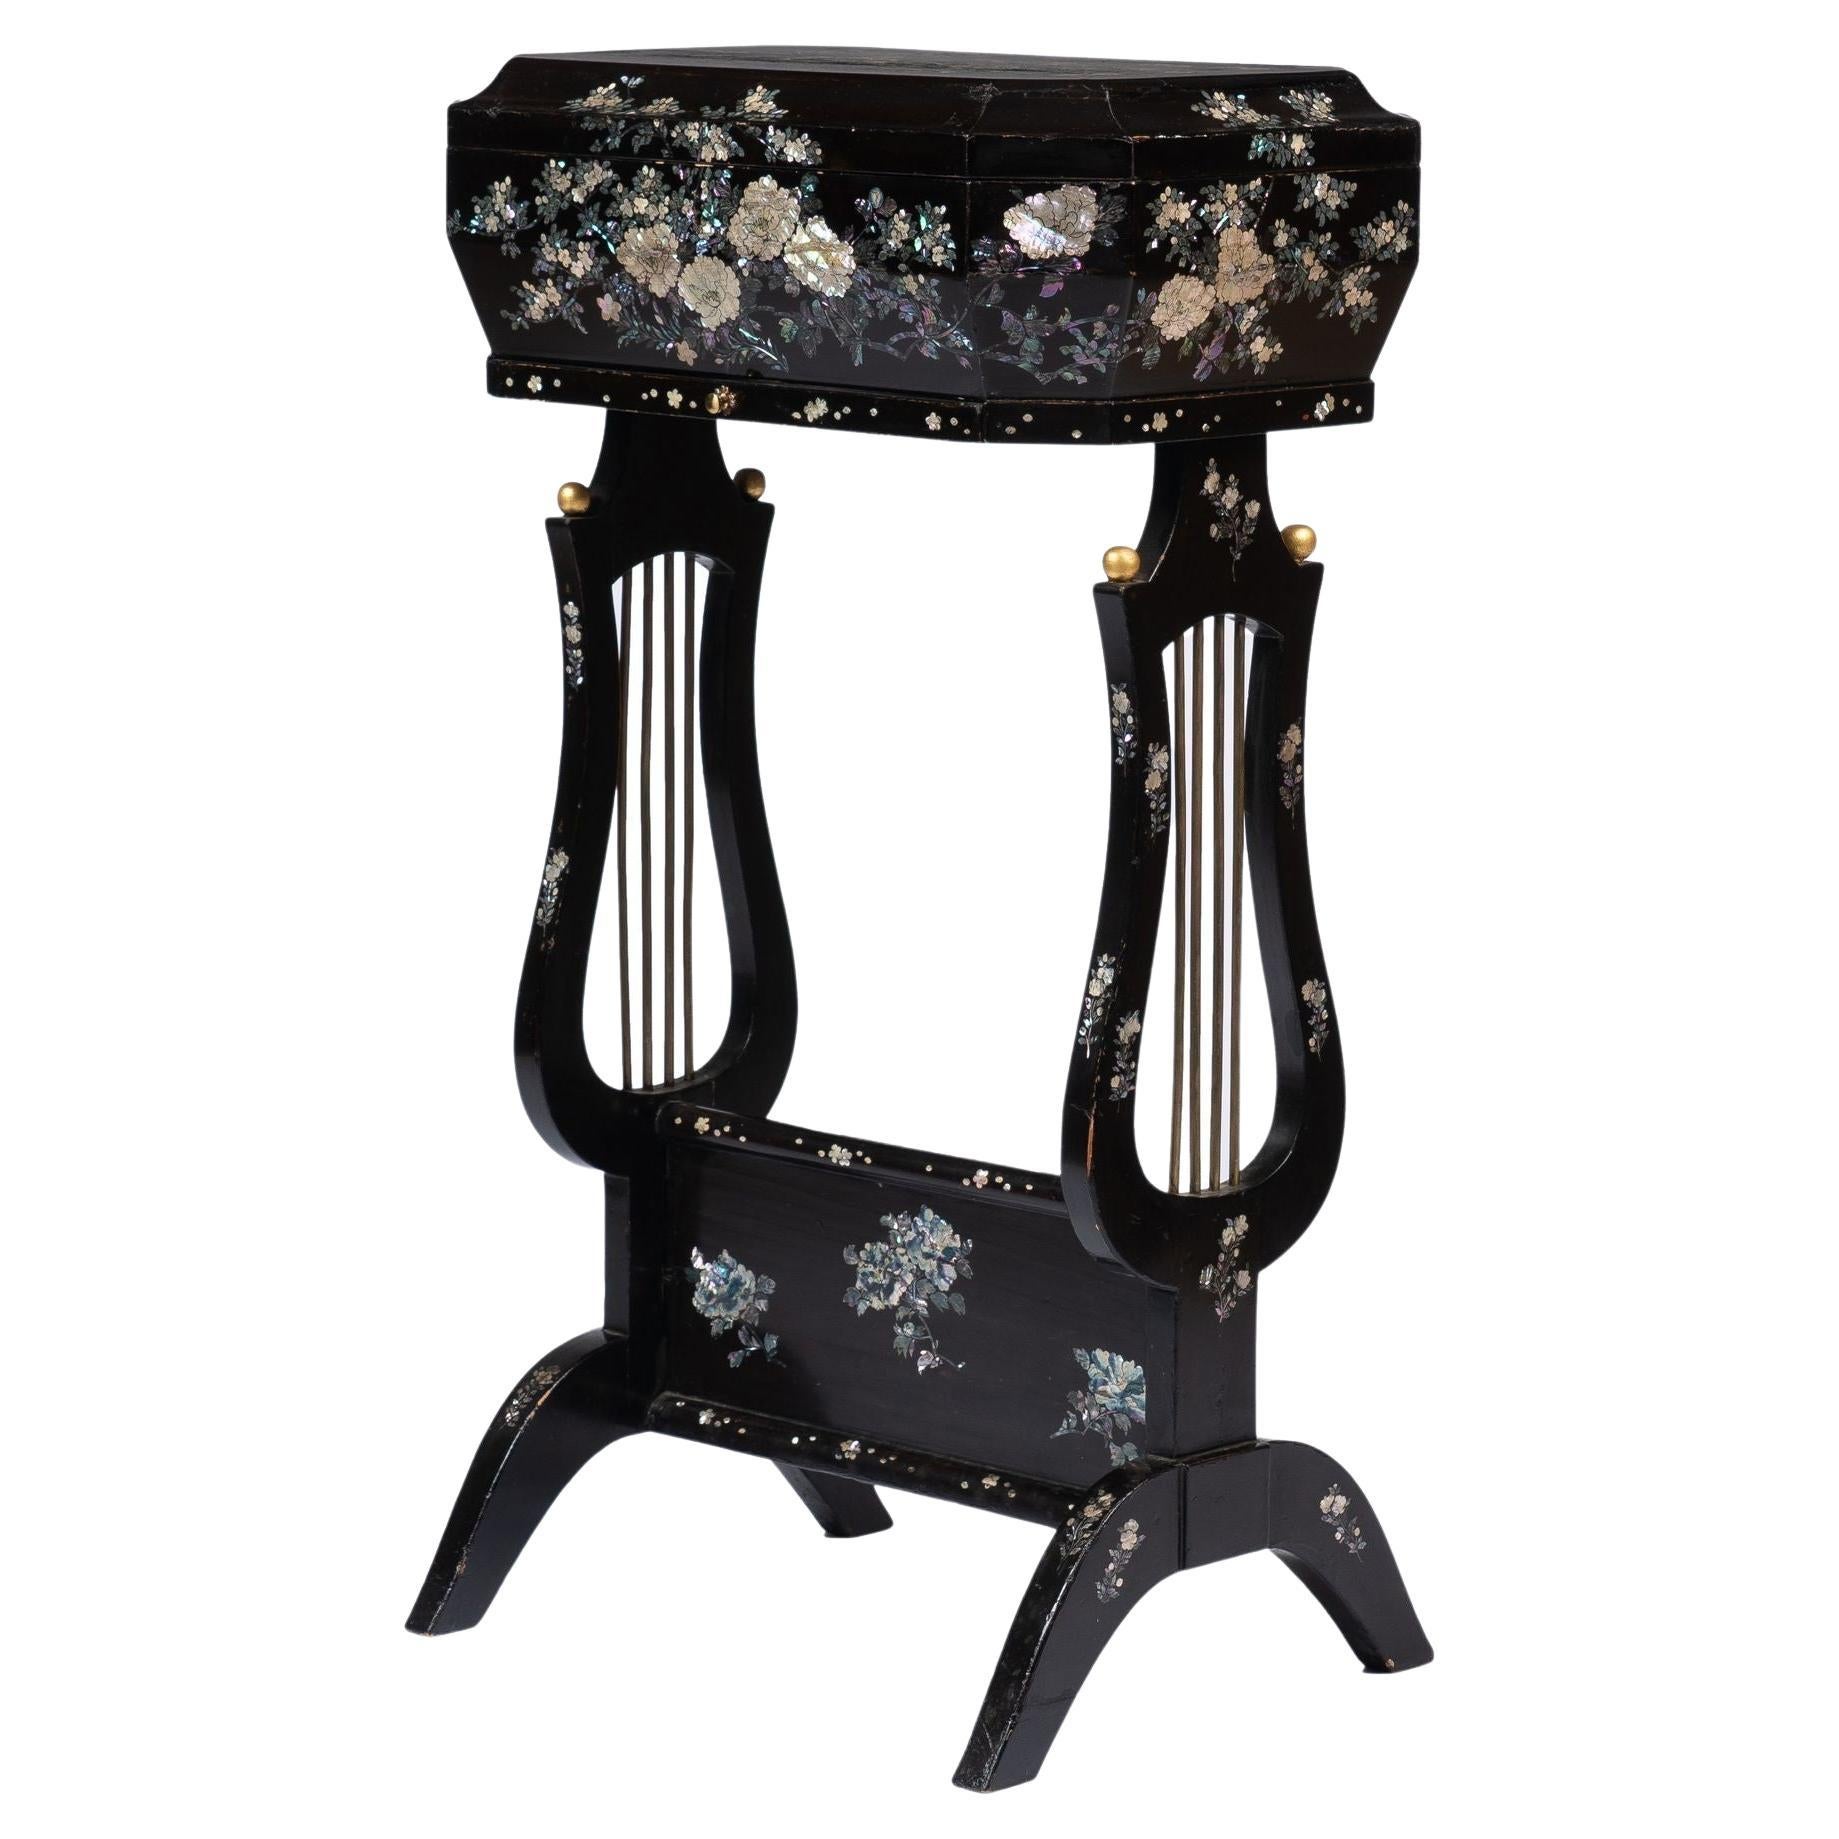 Japanese Lyre Base Sewing Box on Stand with Mother-Of Pearl Inlays, c. 1880 For Sale